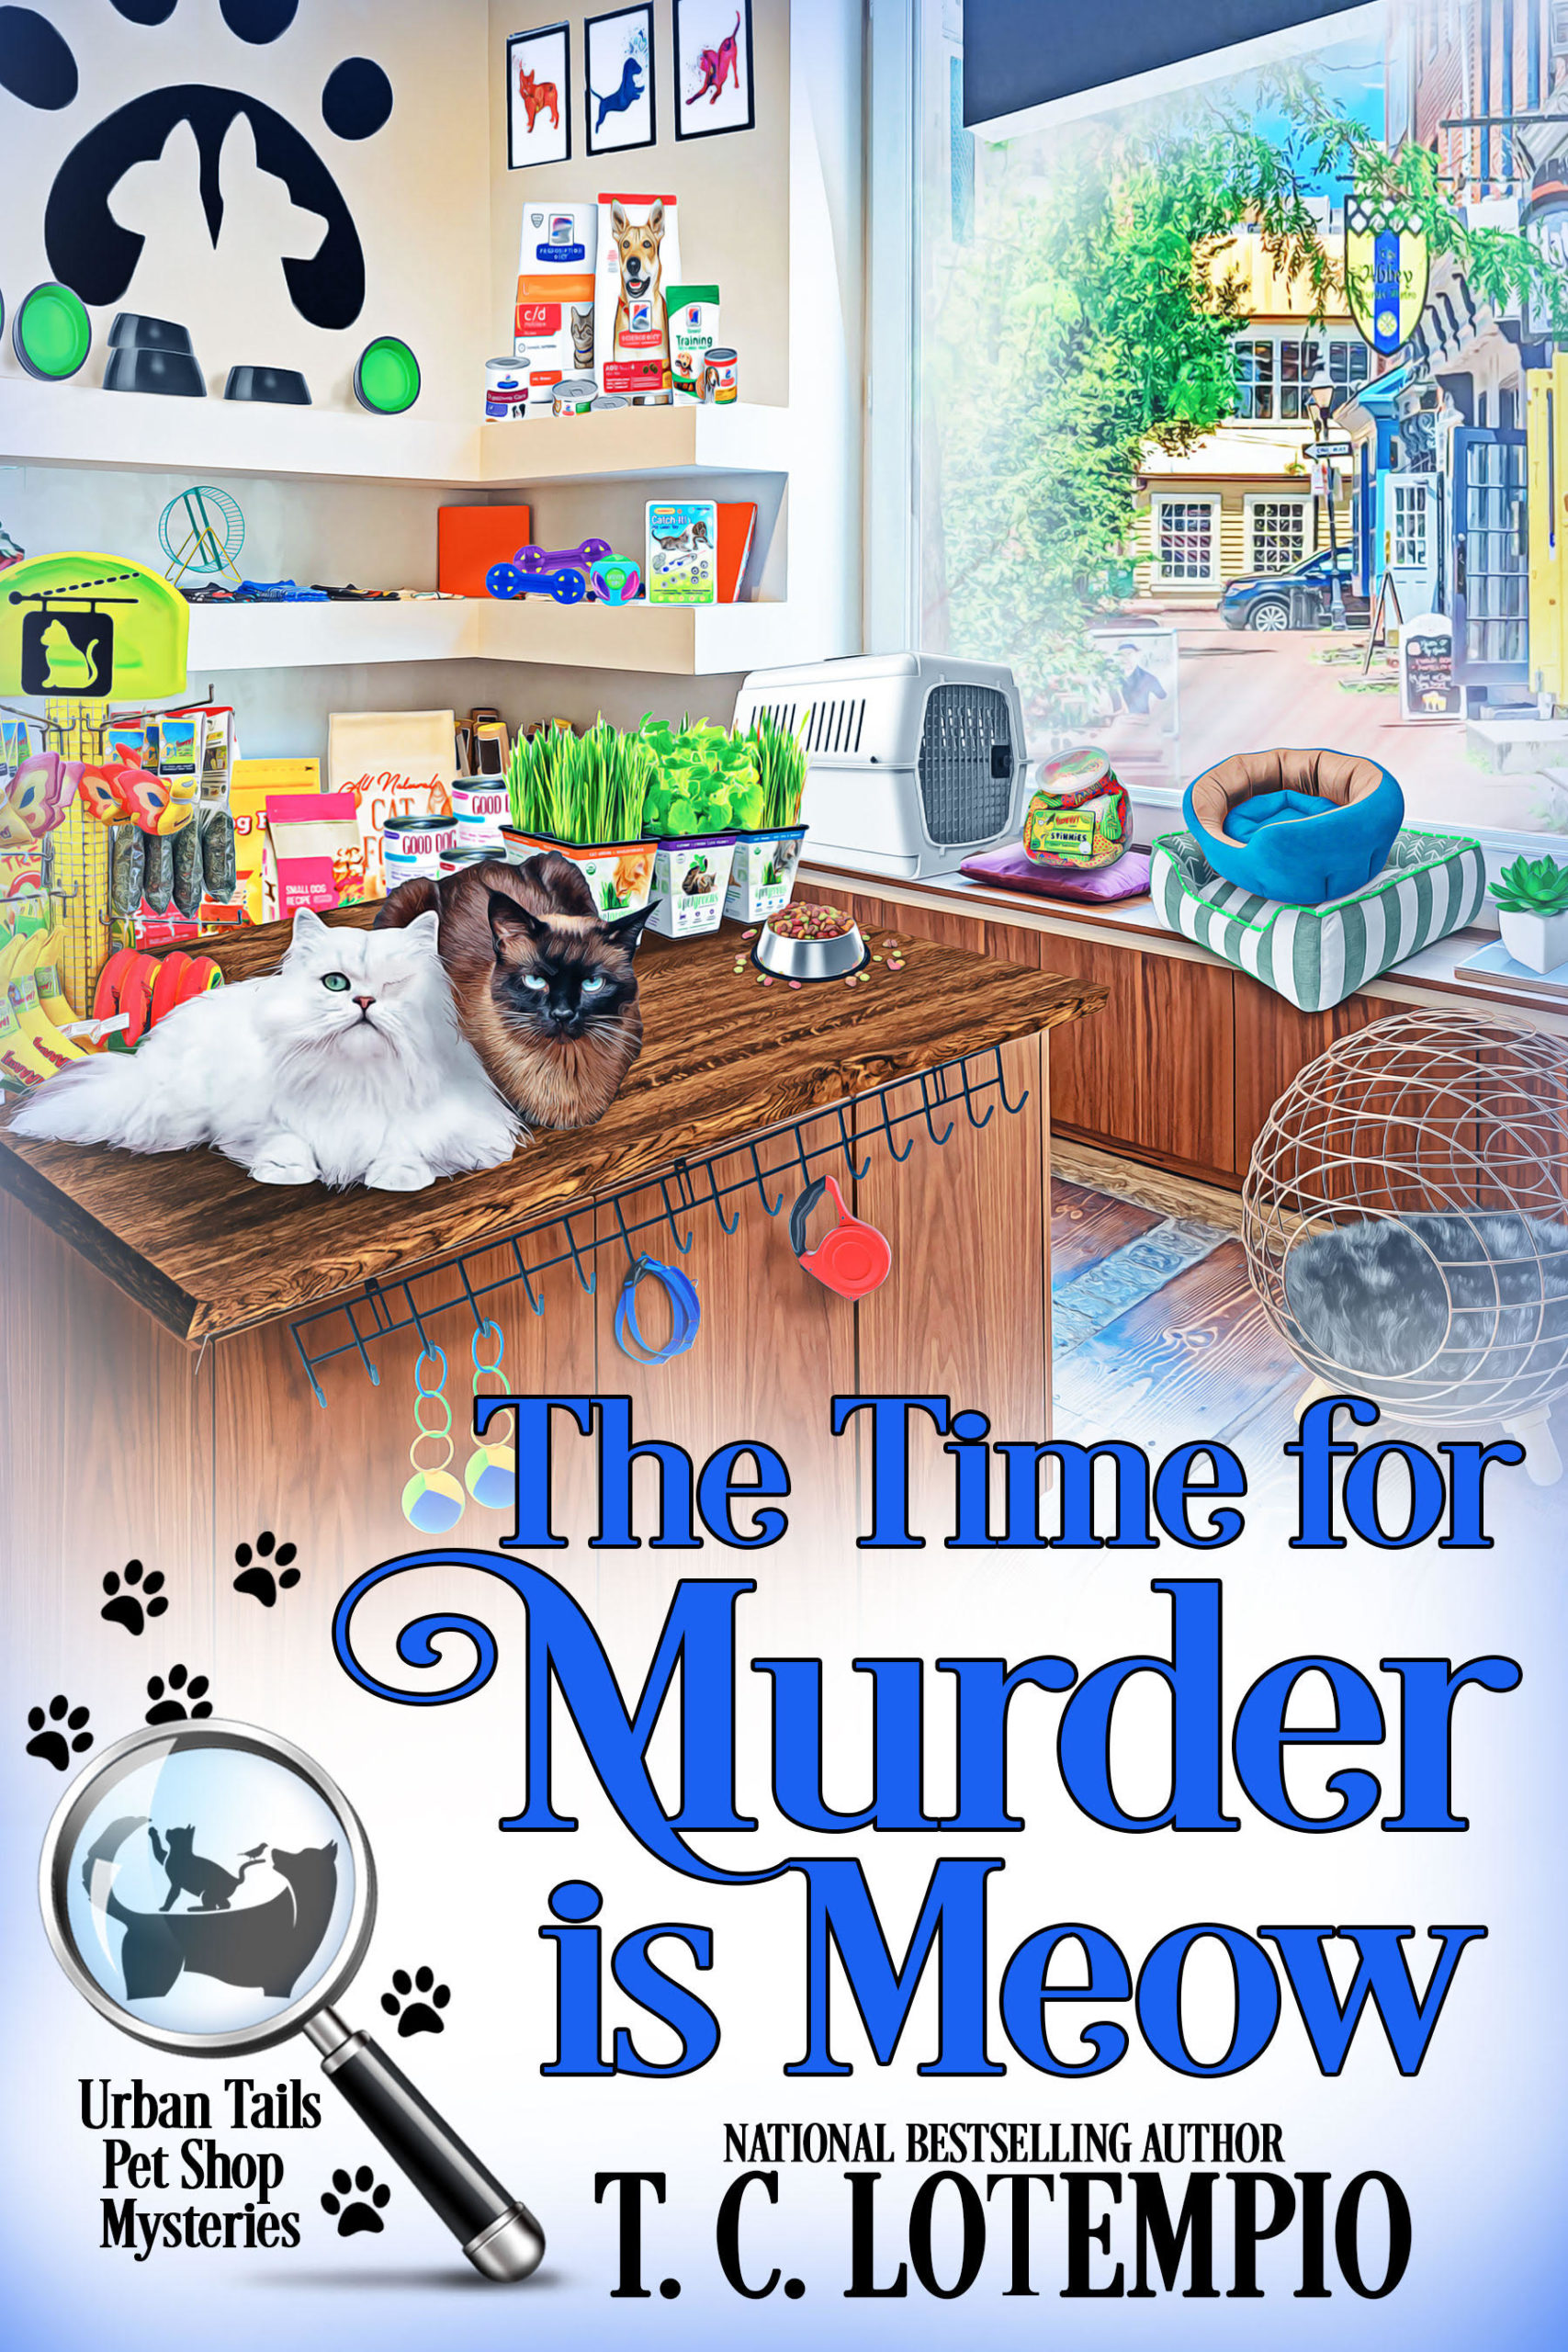 The Time for Murder is Meow by TC LoTempio